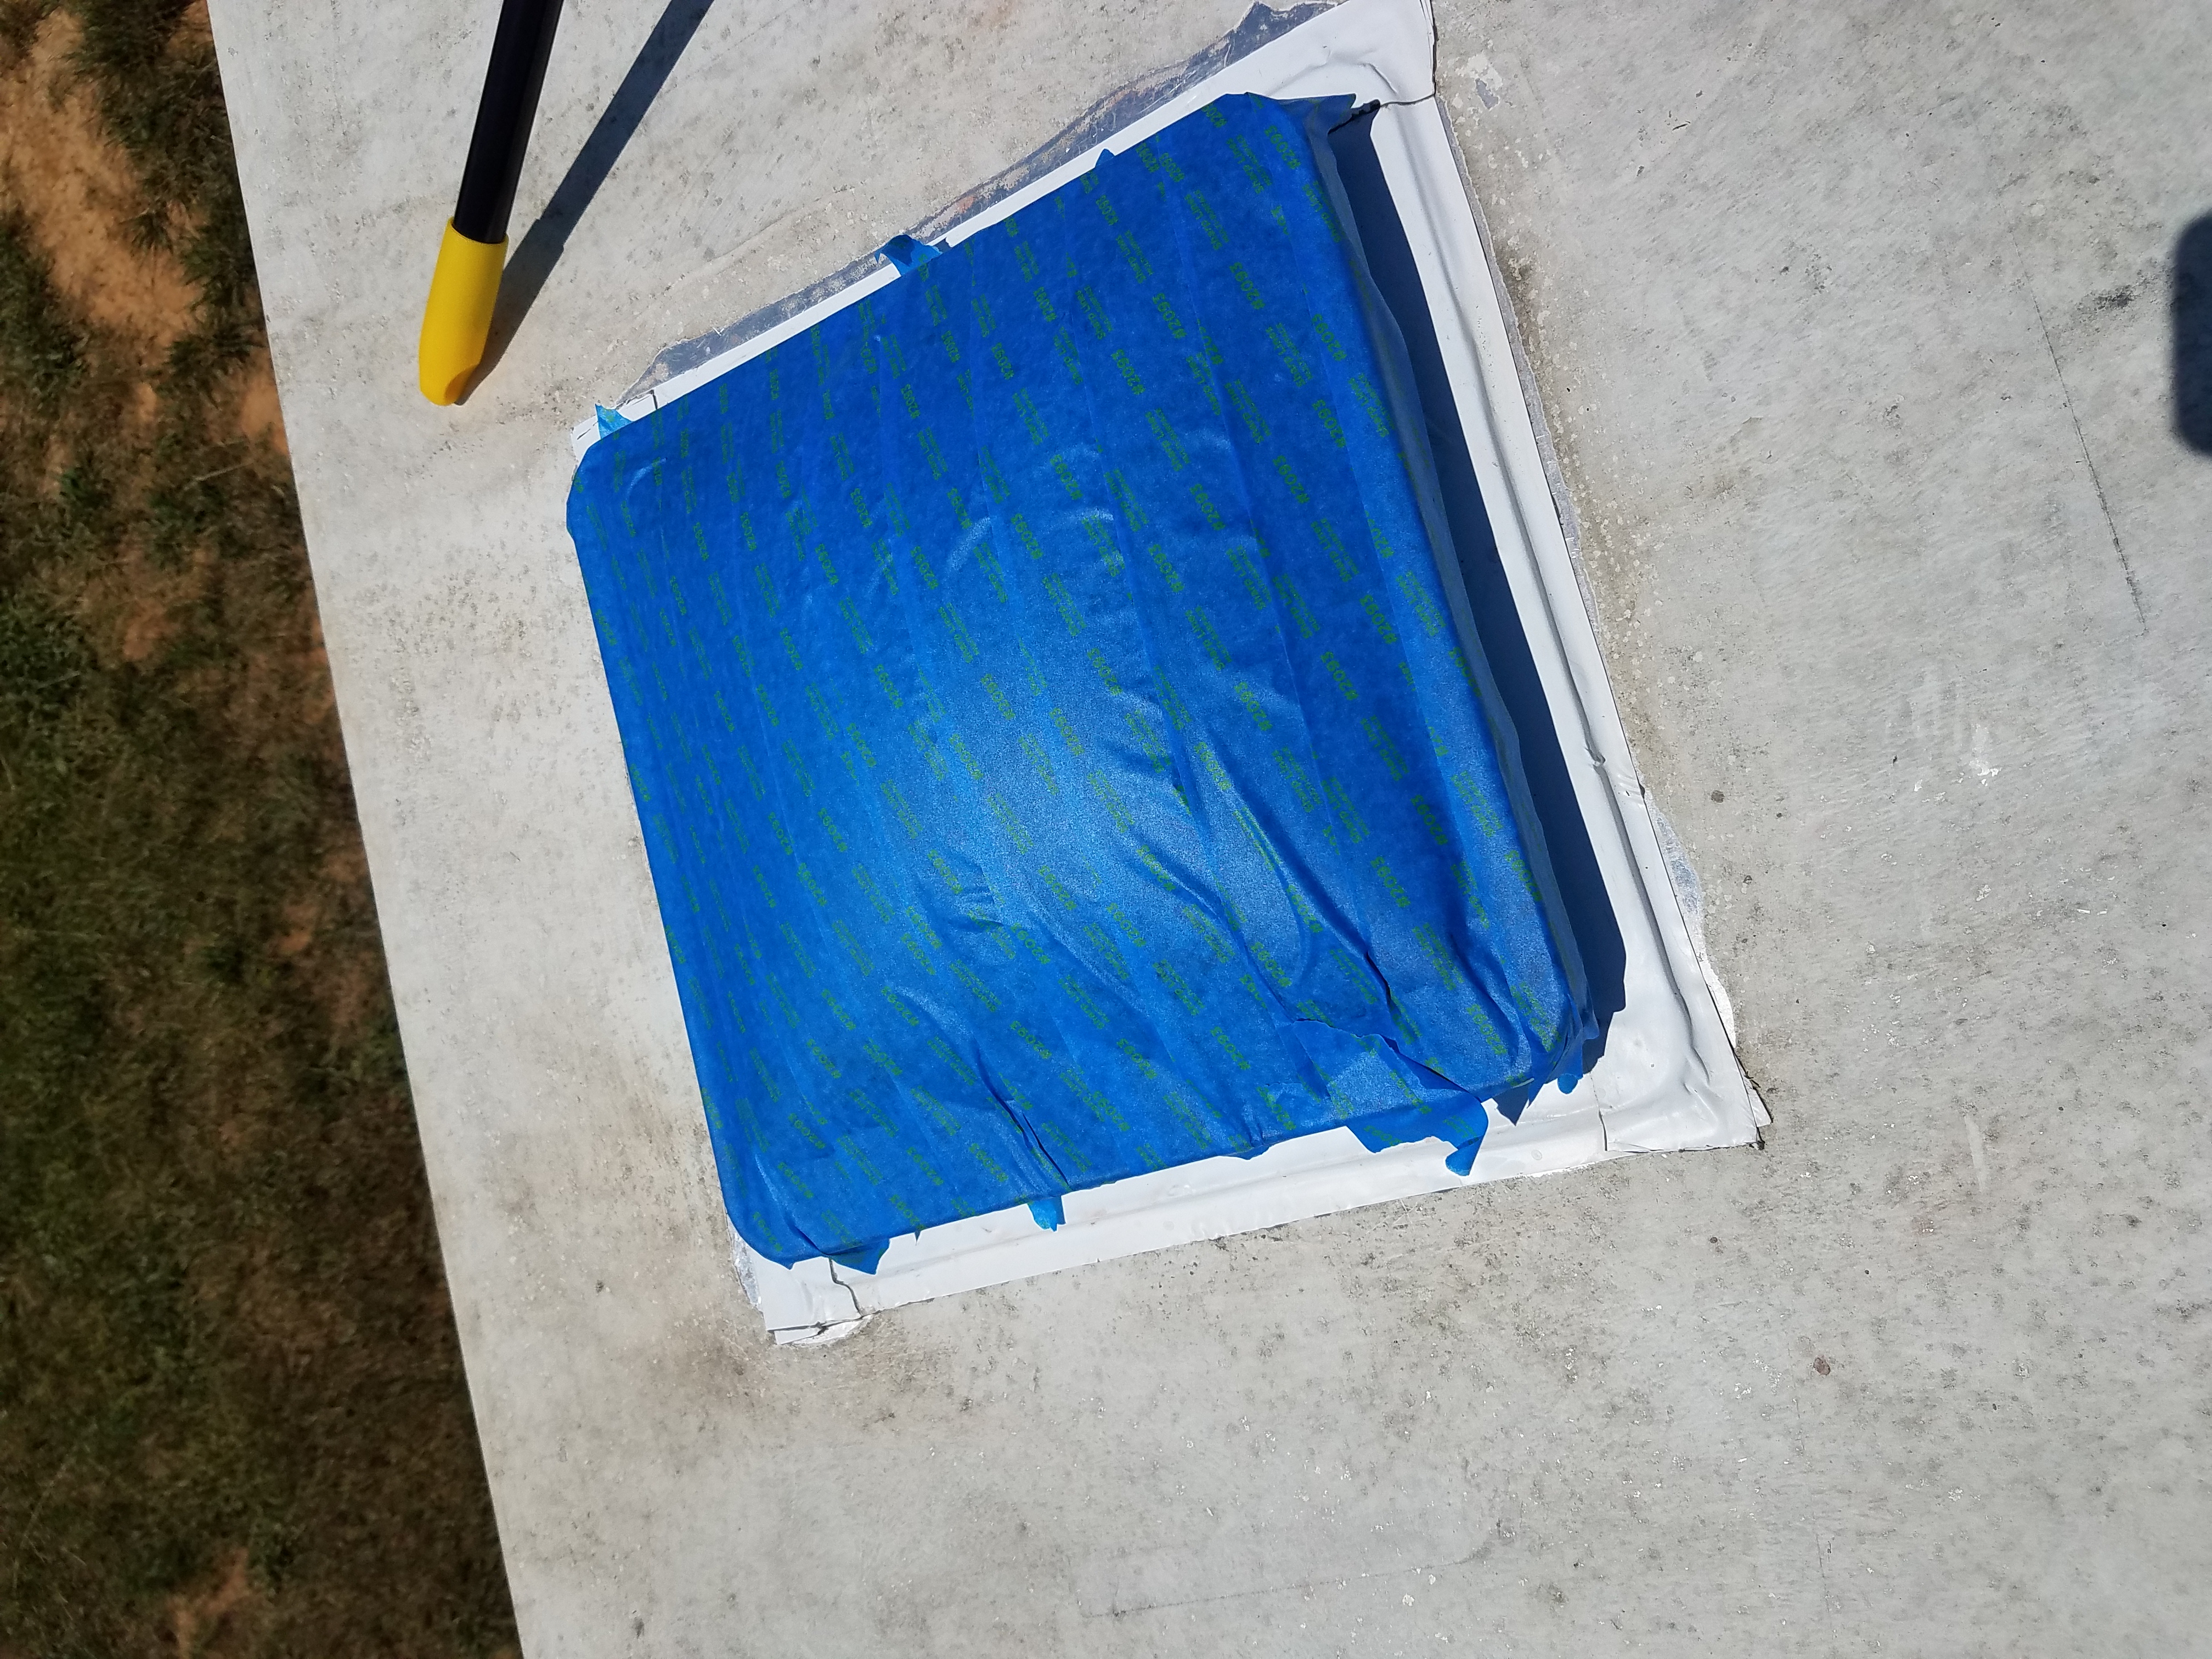 The travel trailer roof vent covered with tape before painting